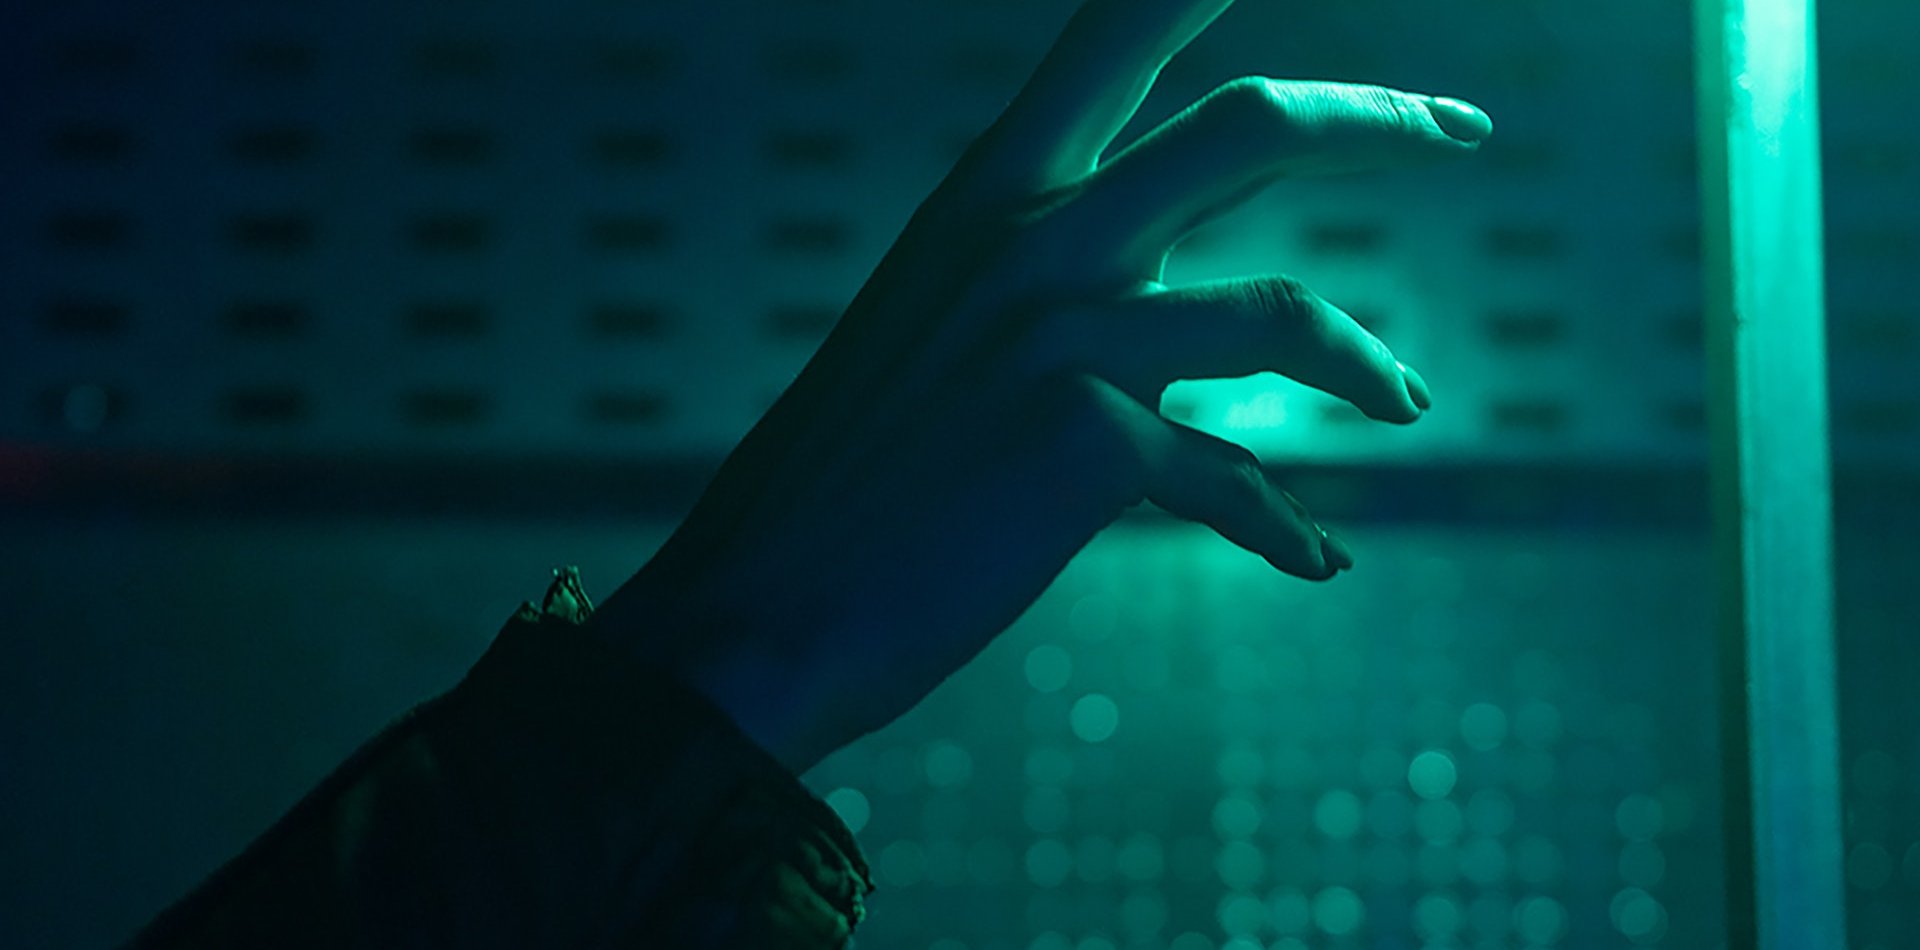 Hand with a background of turquoise light